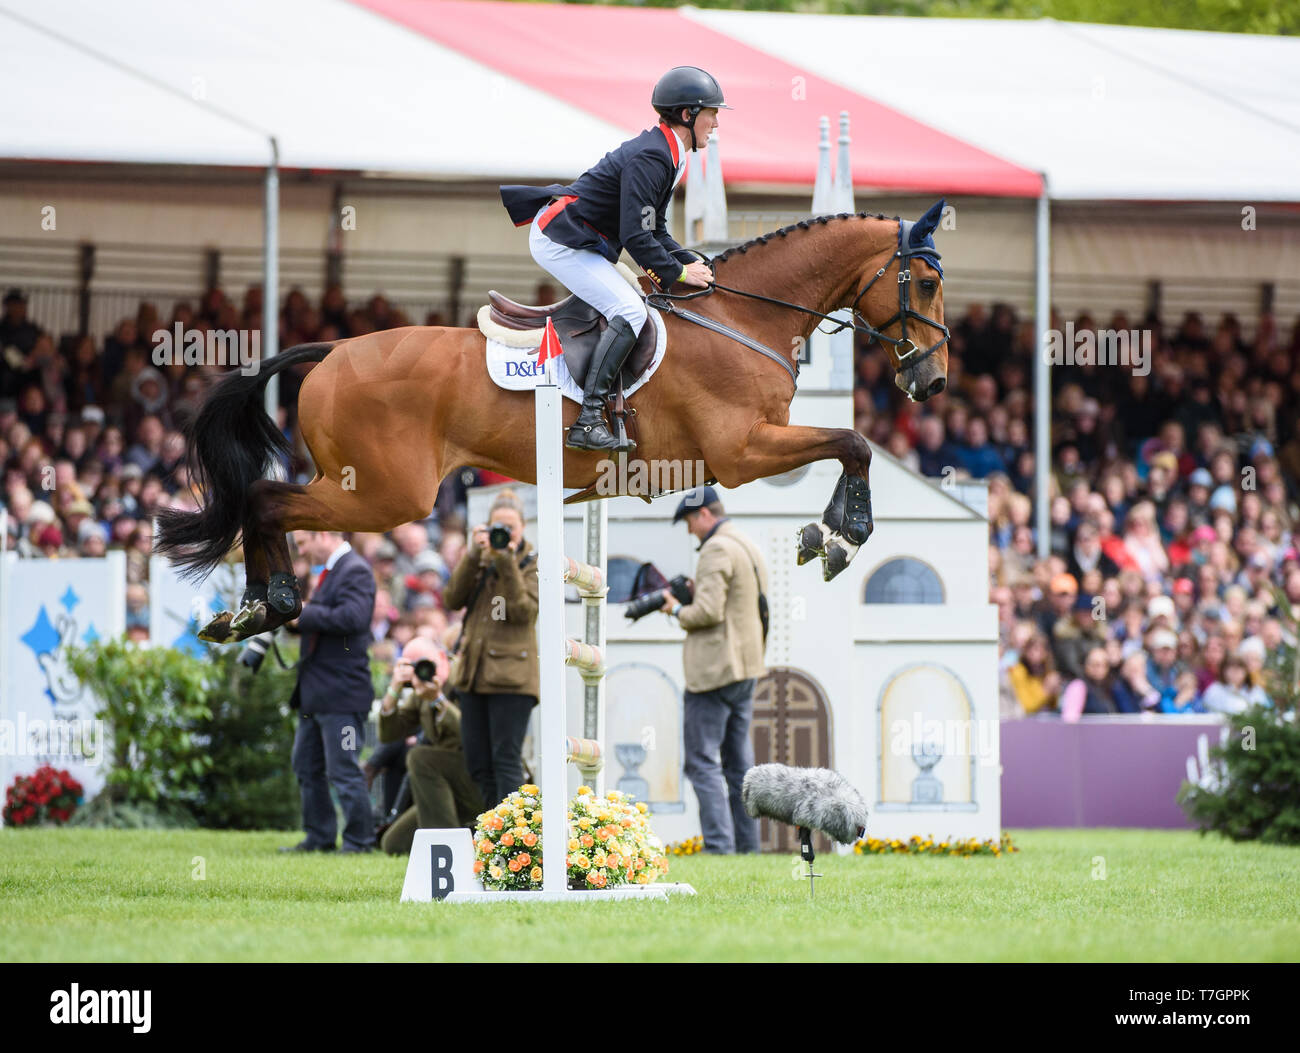 Tom McEwen and TOLEDO DE KERSER during the showjumping phase, Mitsubishi Motors Badminton Horse Trials, Gloucestershire, 2019 Stock Photo